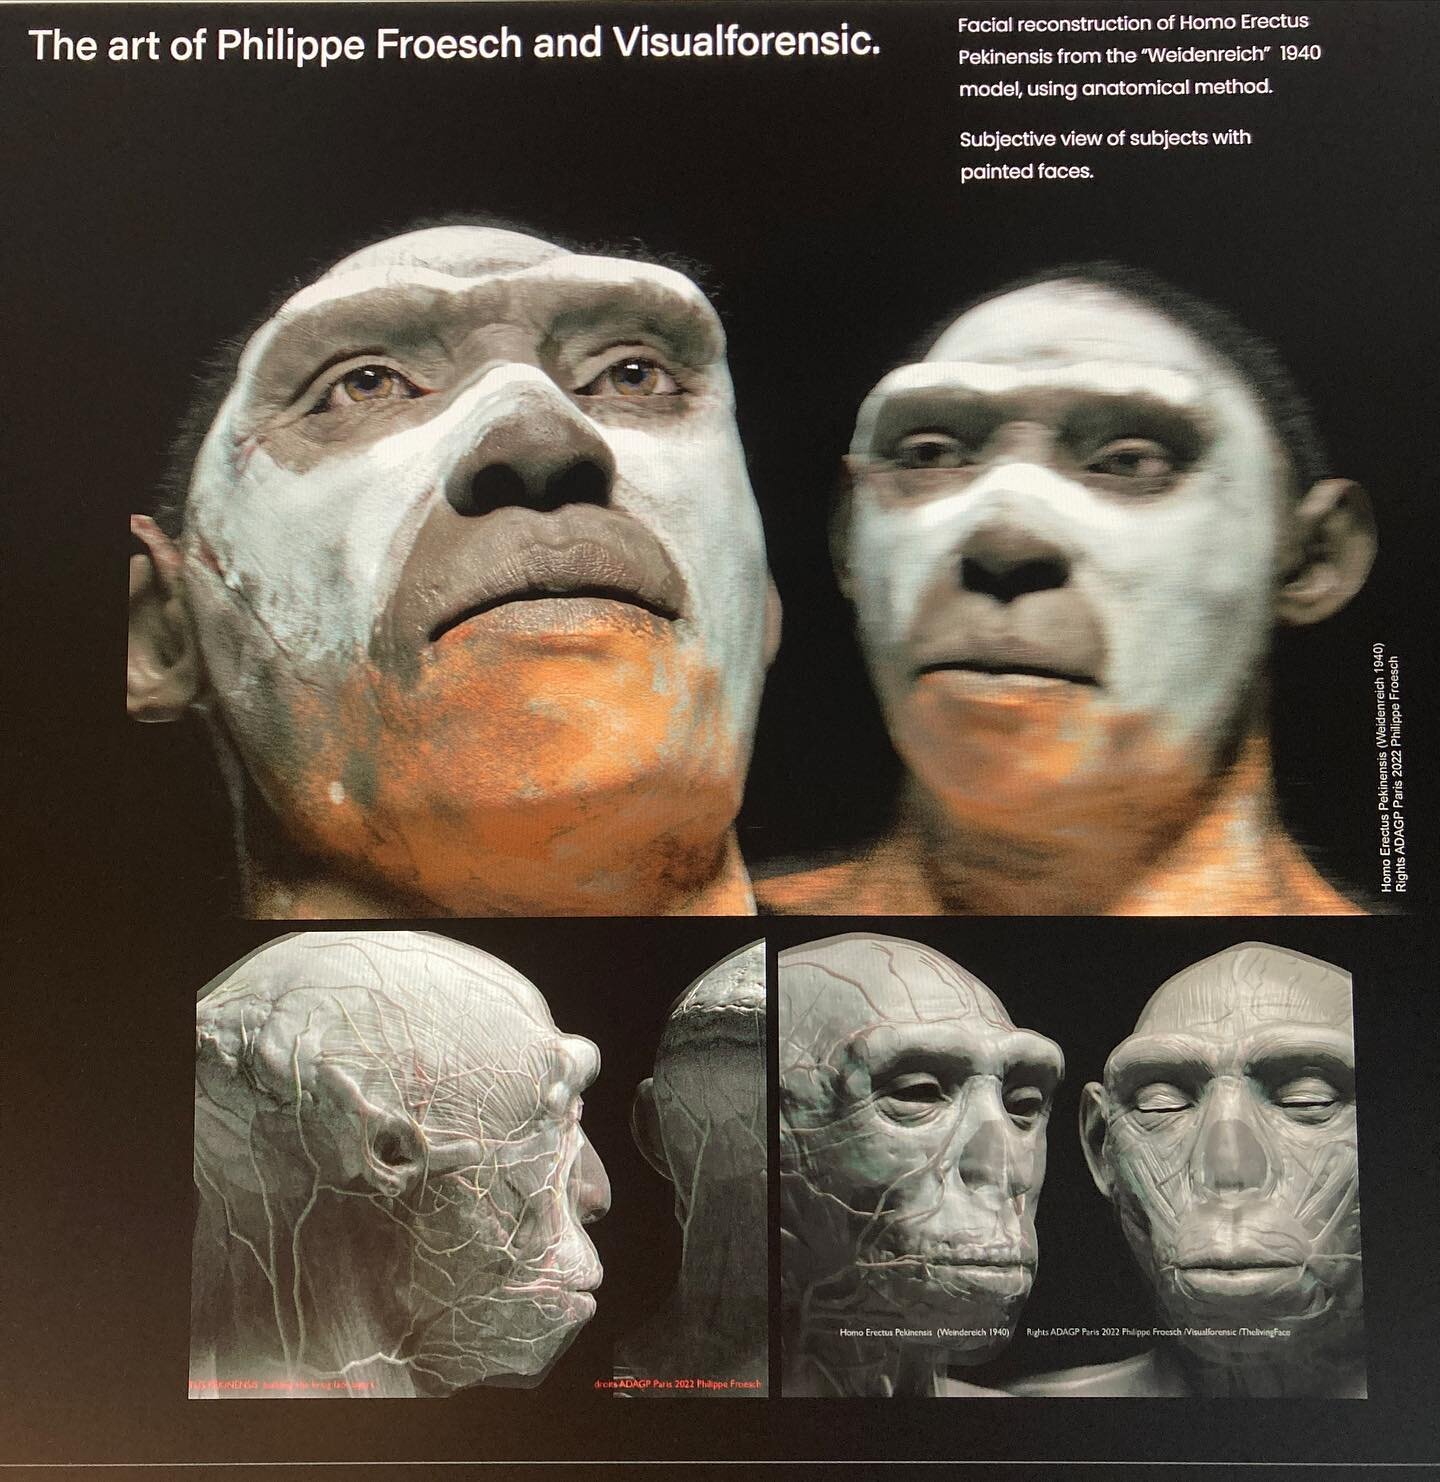 Facial reconstruction of Weidenreich&rsquo;s Homo Erectus Pekinensis . More in thelivingface.com. #forensicscience #skull  #vray #zbrush #anthropology  #archaeology # cgi #vfx #vfxartist 
#3d #forensicscience #skull #render #cinema4d #vray #vrayforc4